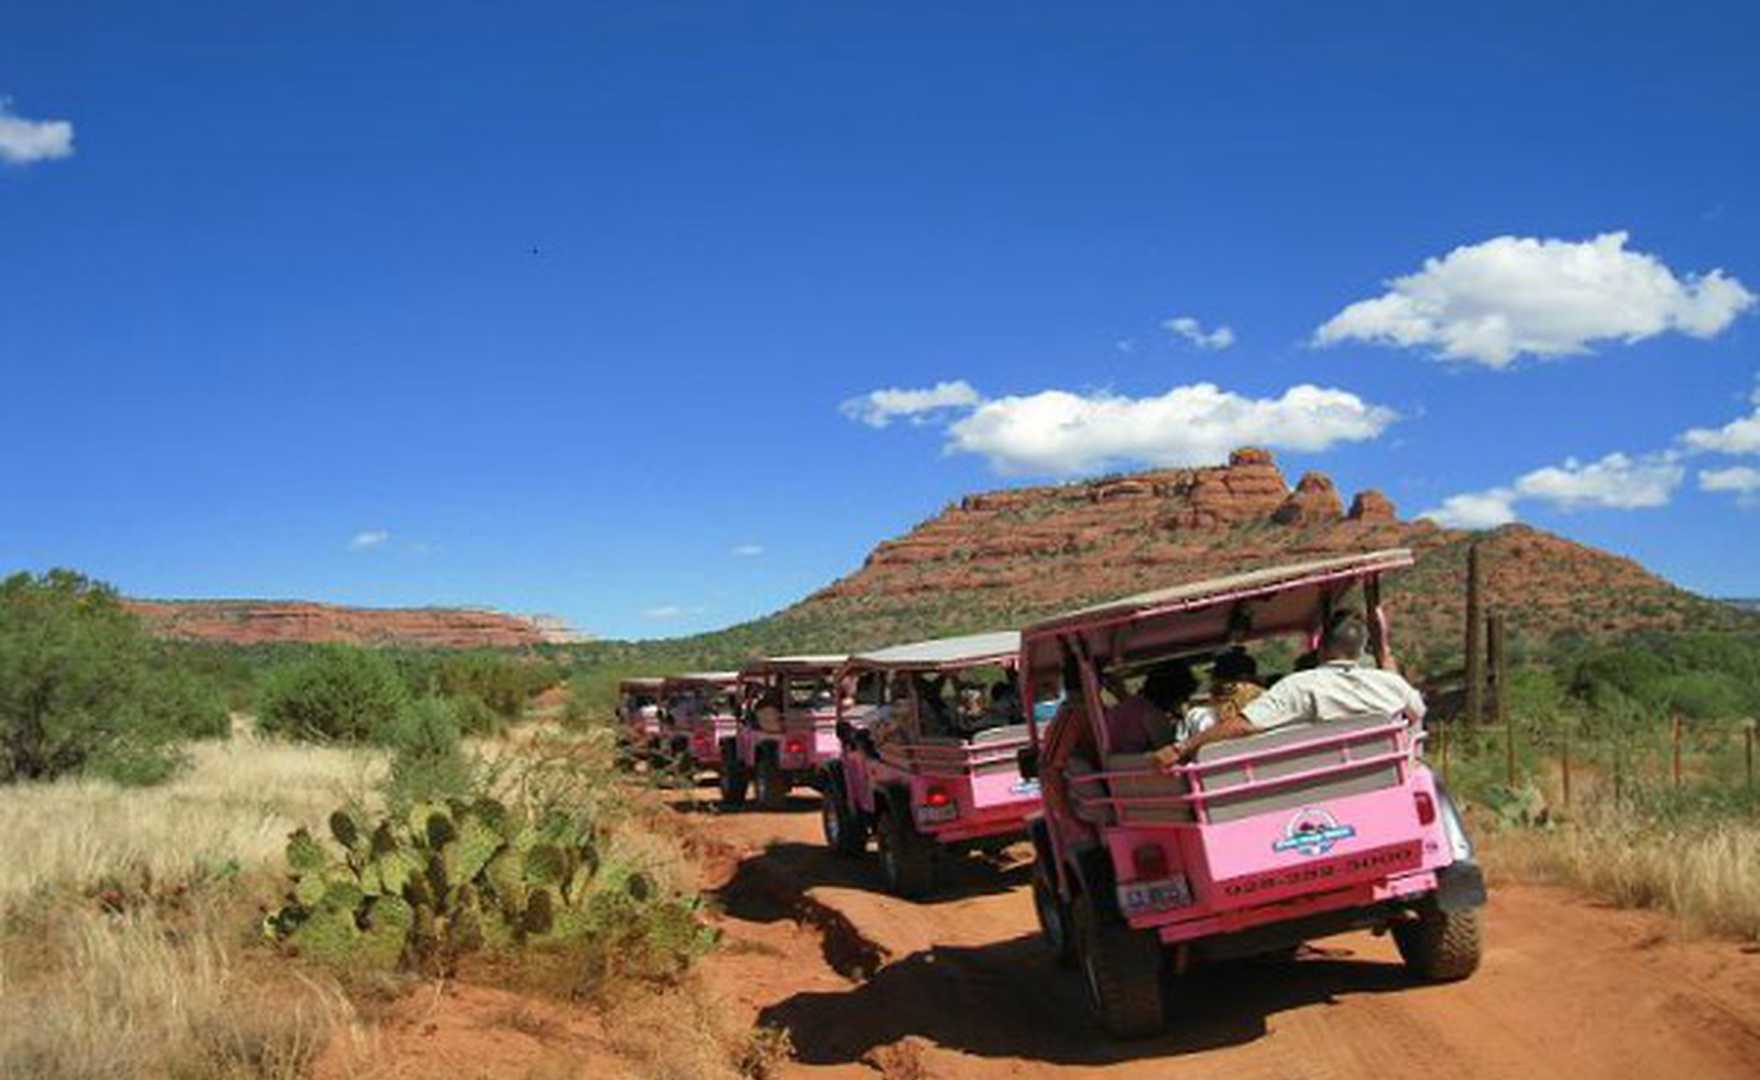 Pink Jeeps ROK: Habit no. 9: Choosing to be Kind